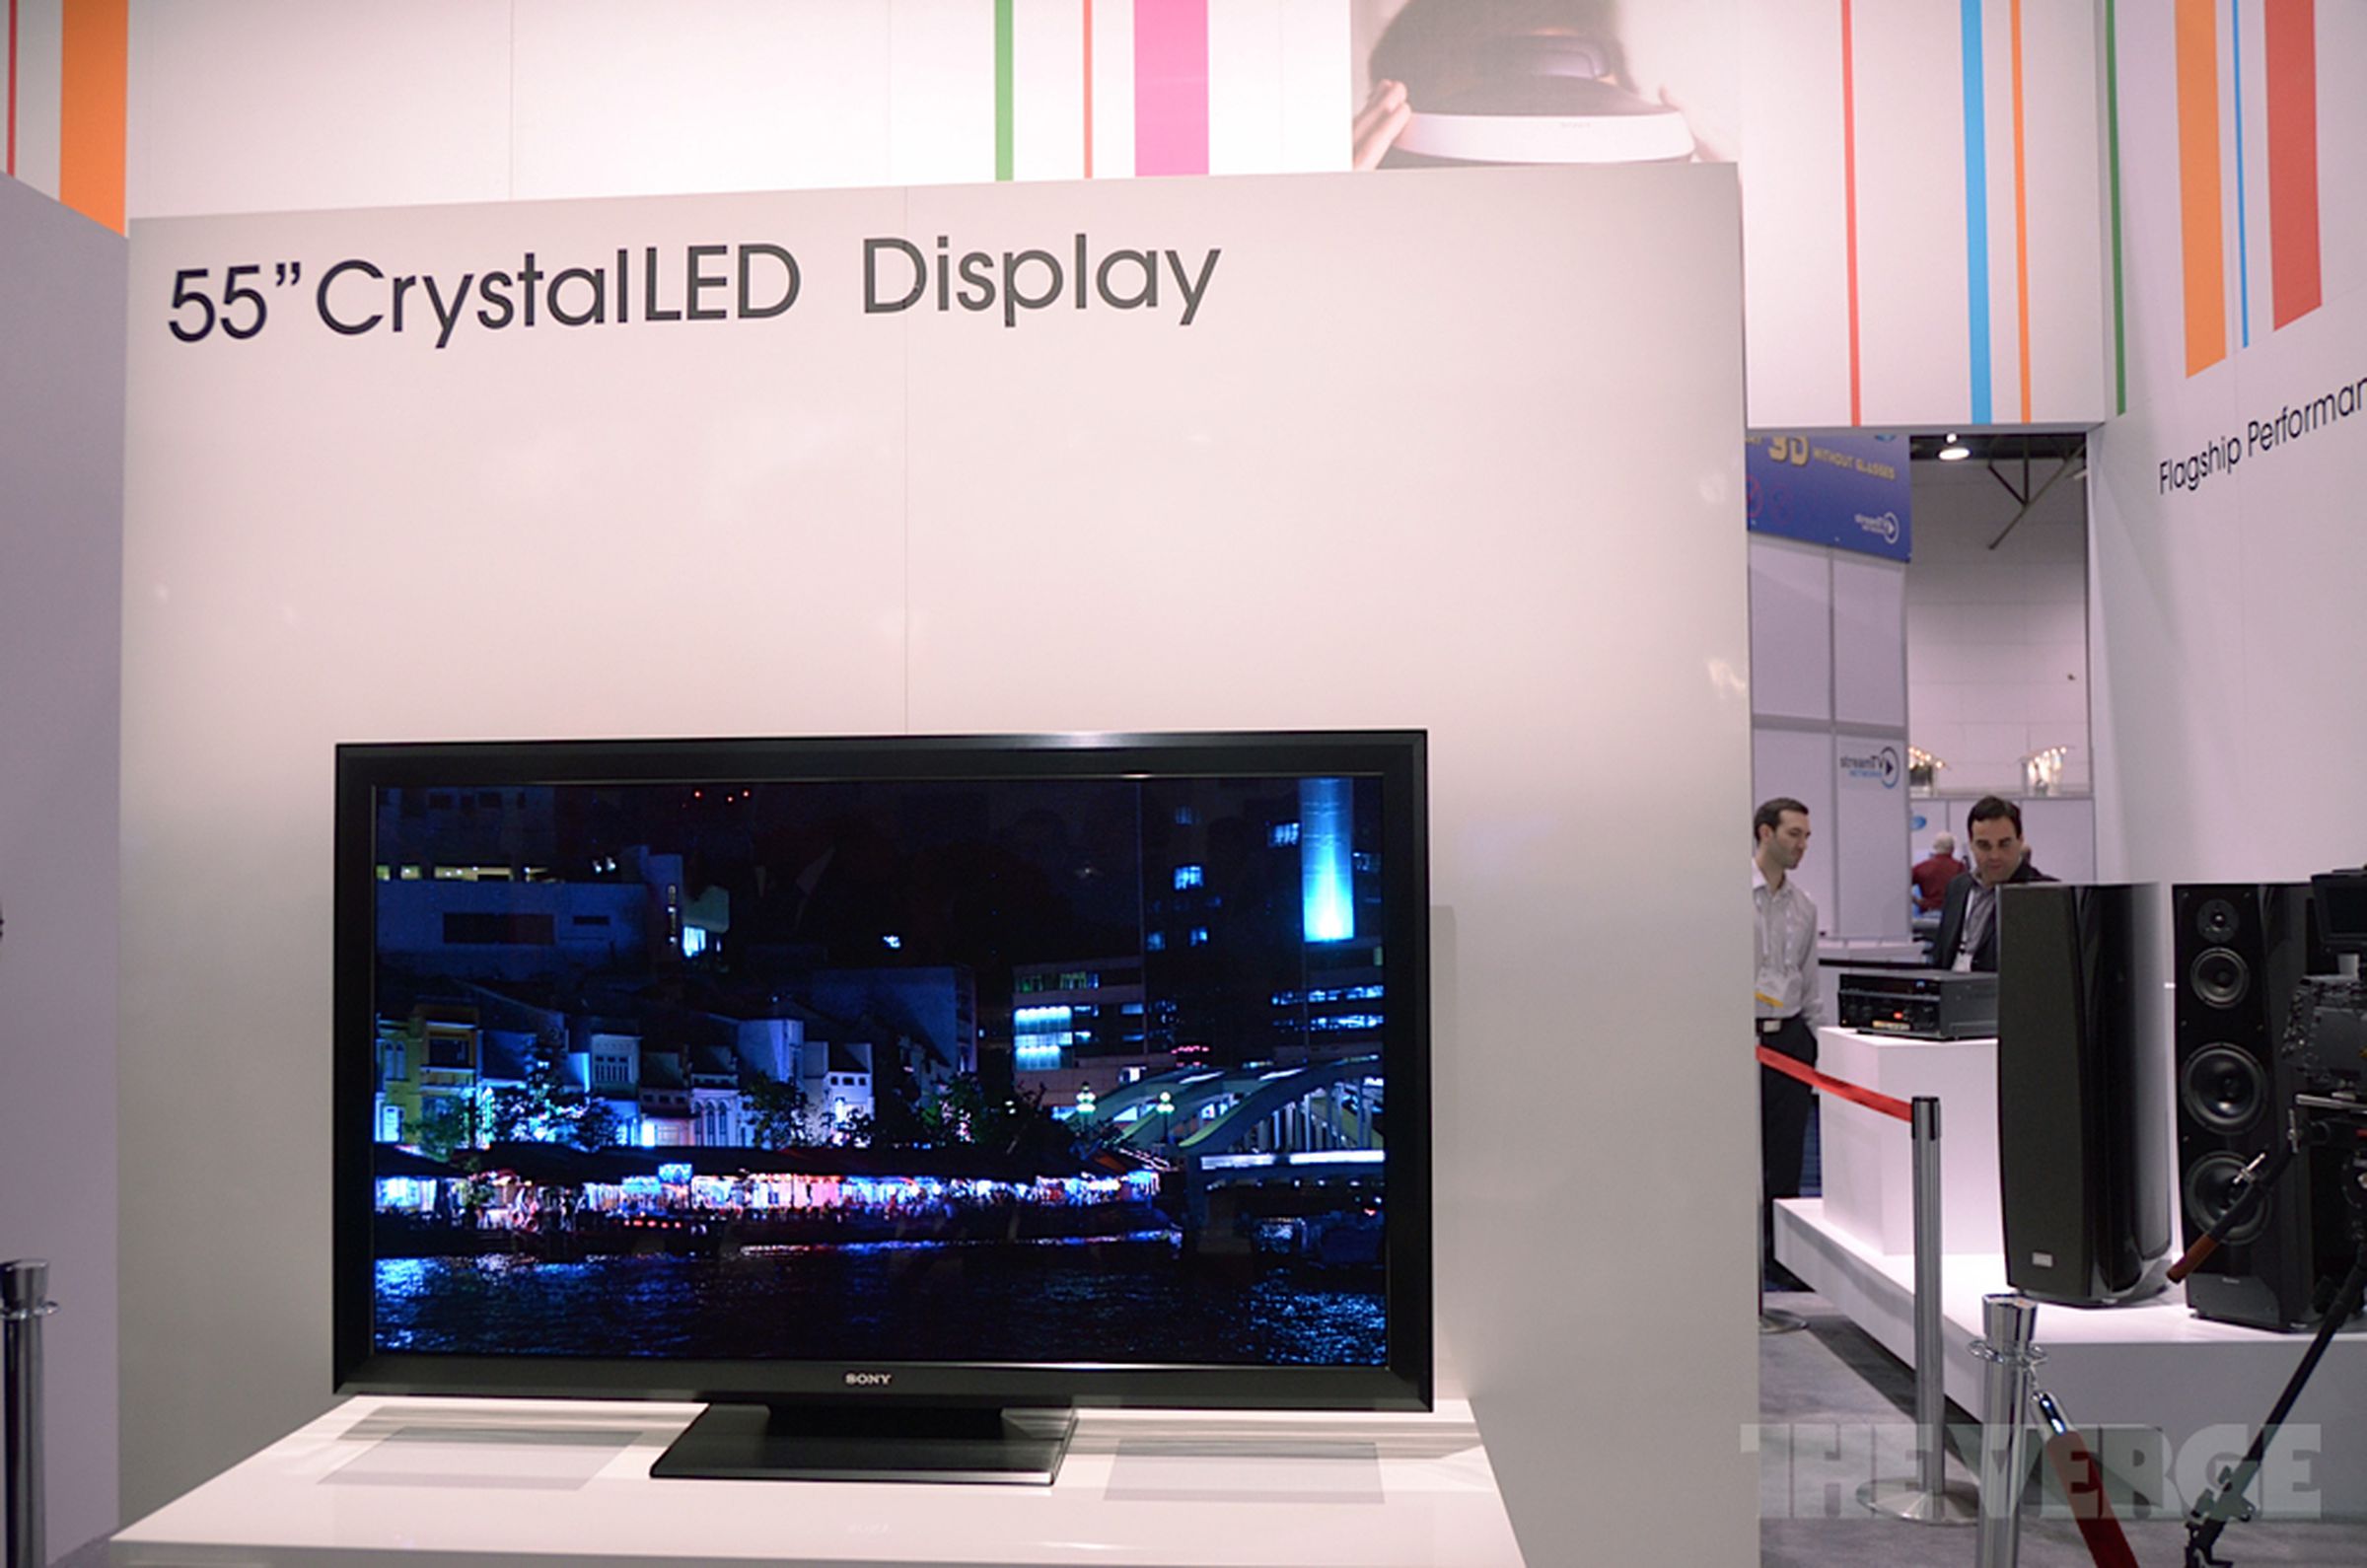 Sony Crystal LED Display prototype pictures from CES 2012